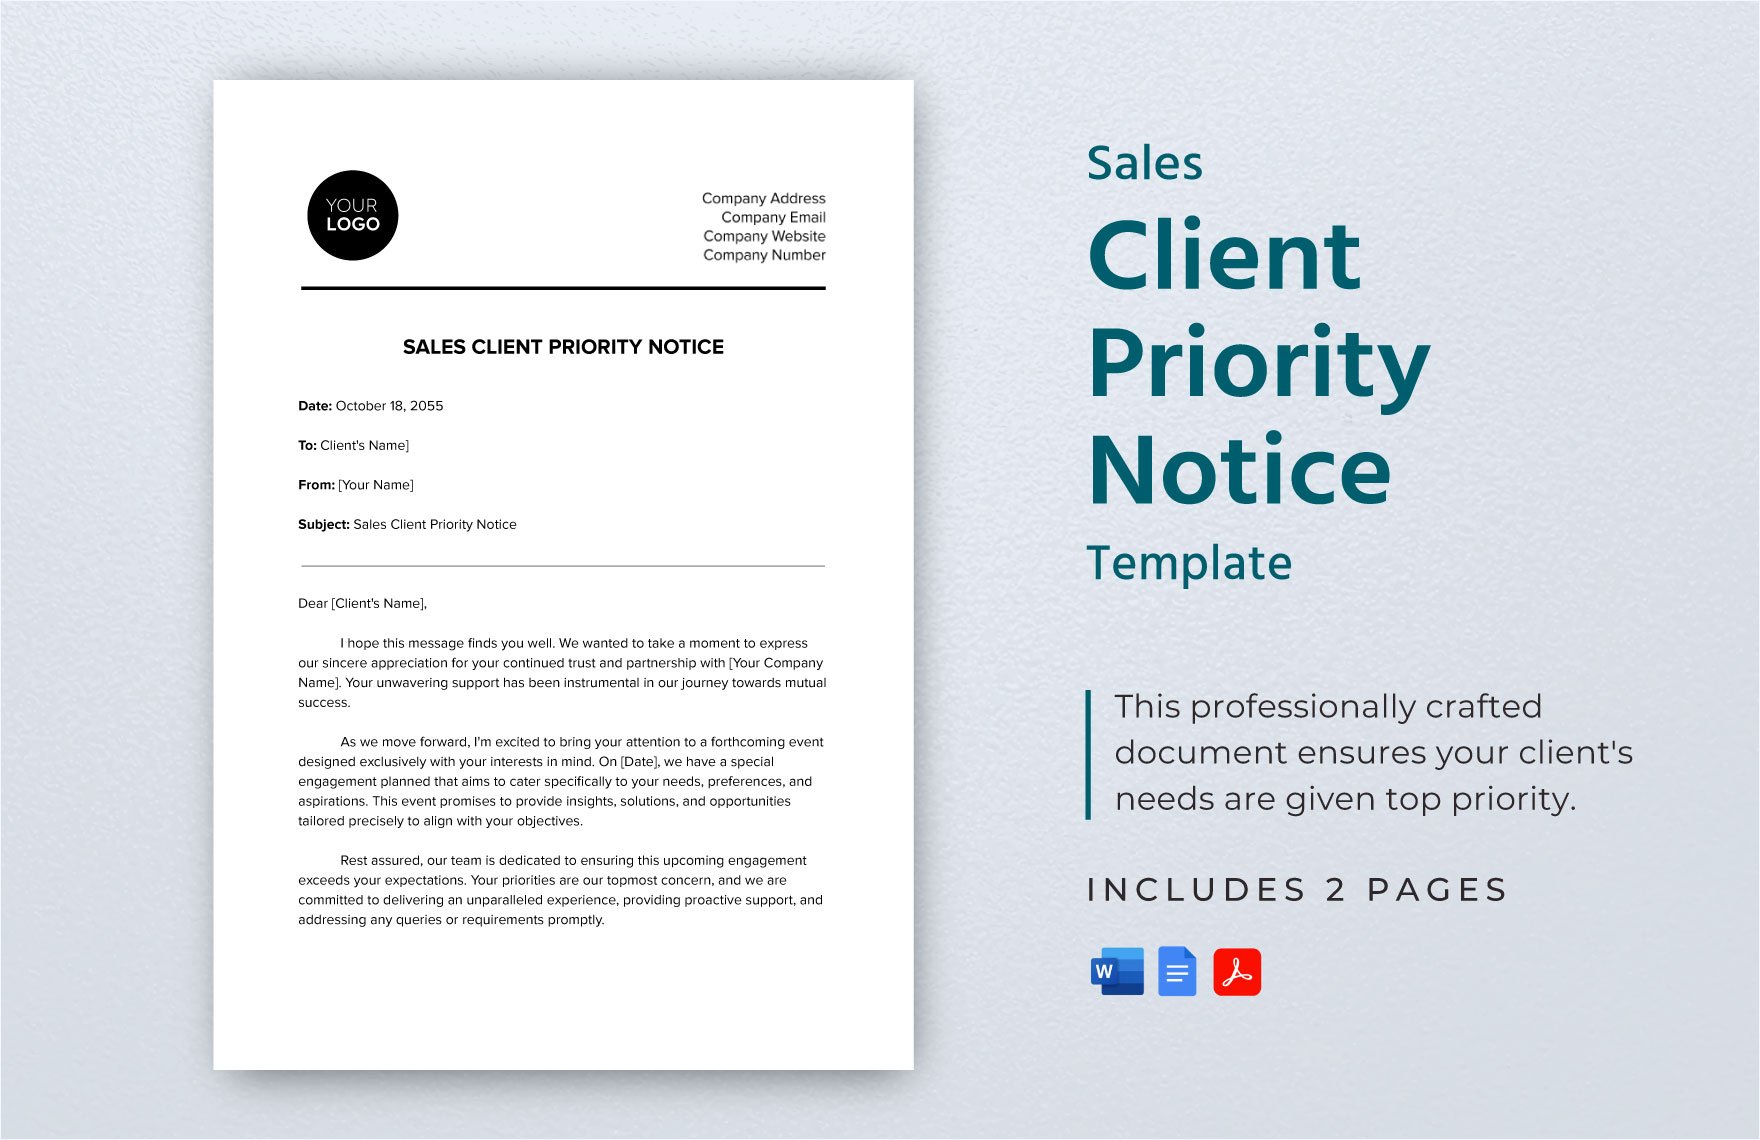 Sales Client Priority Notice Template in Word, Google Docs, PDF